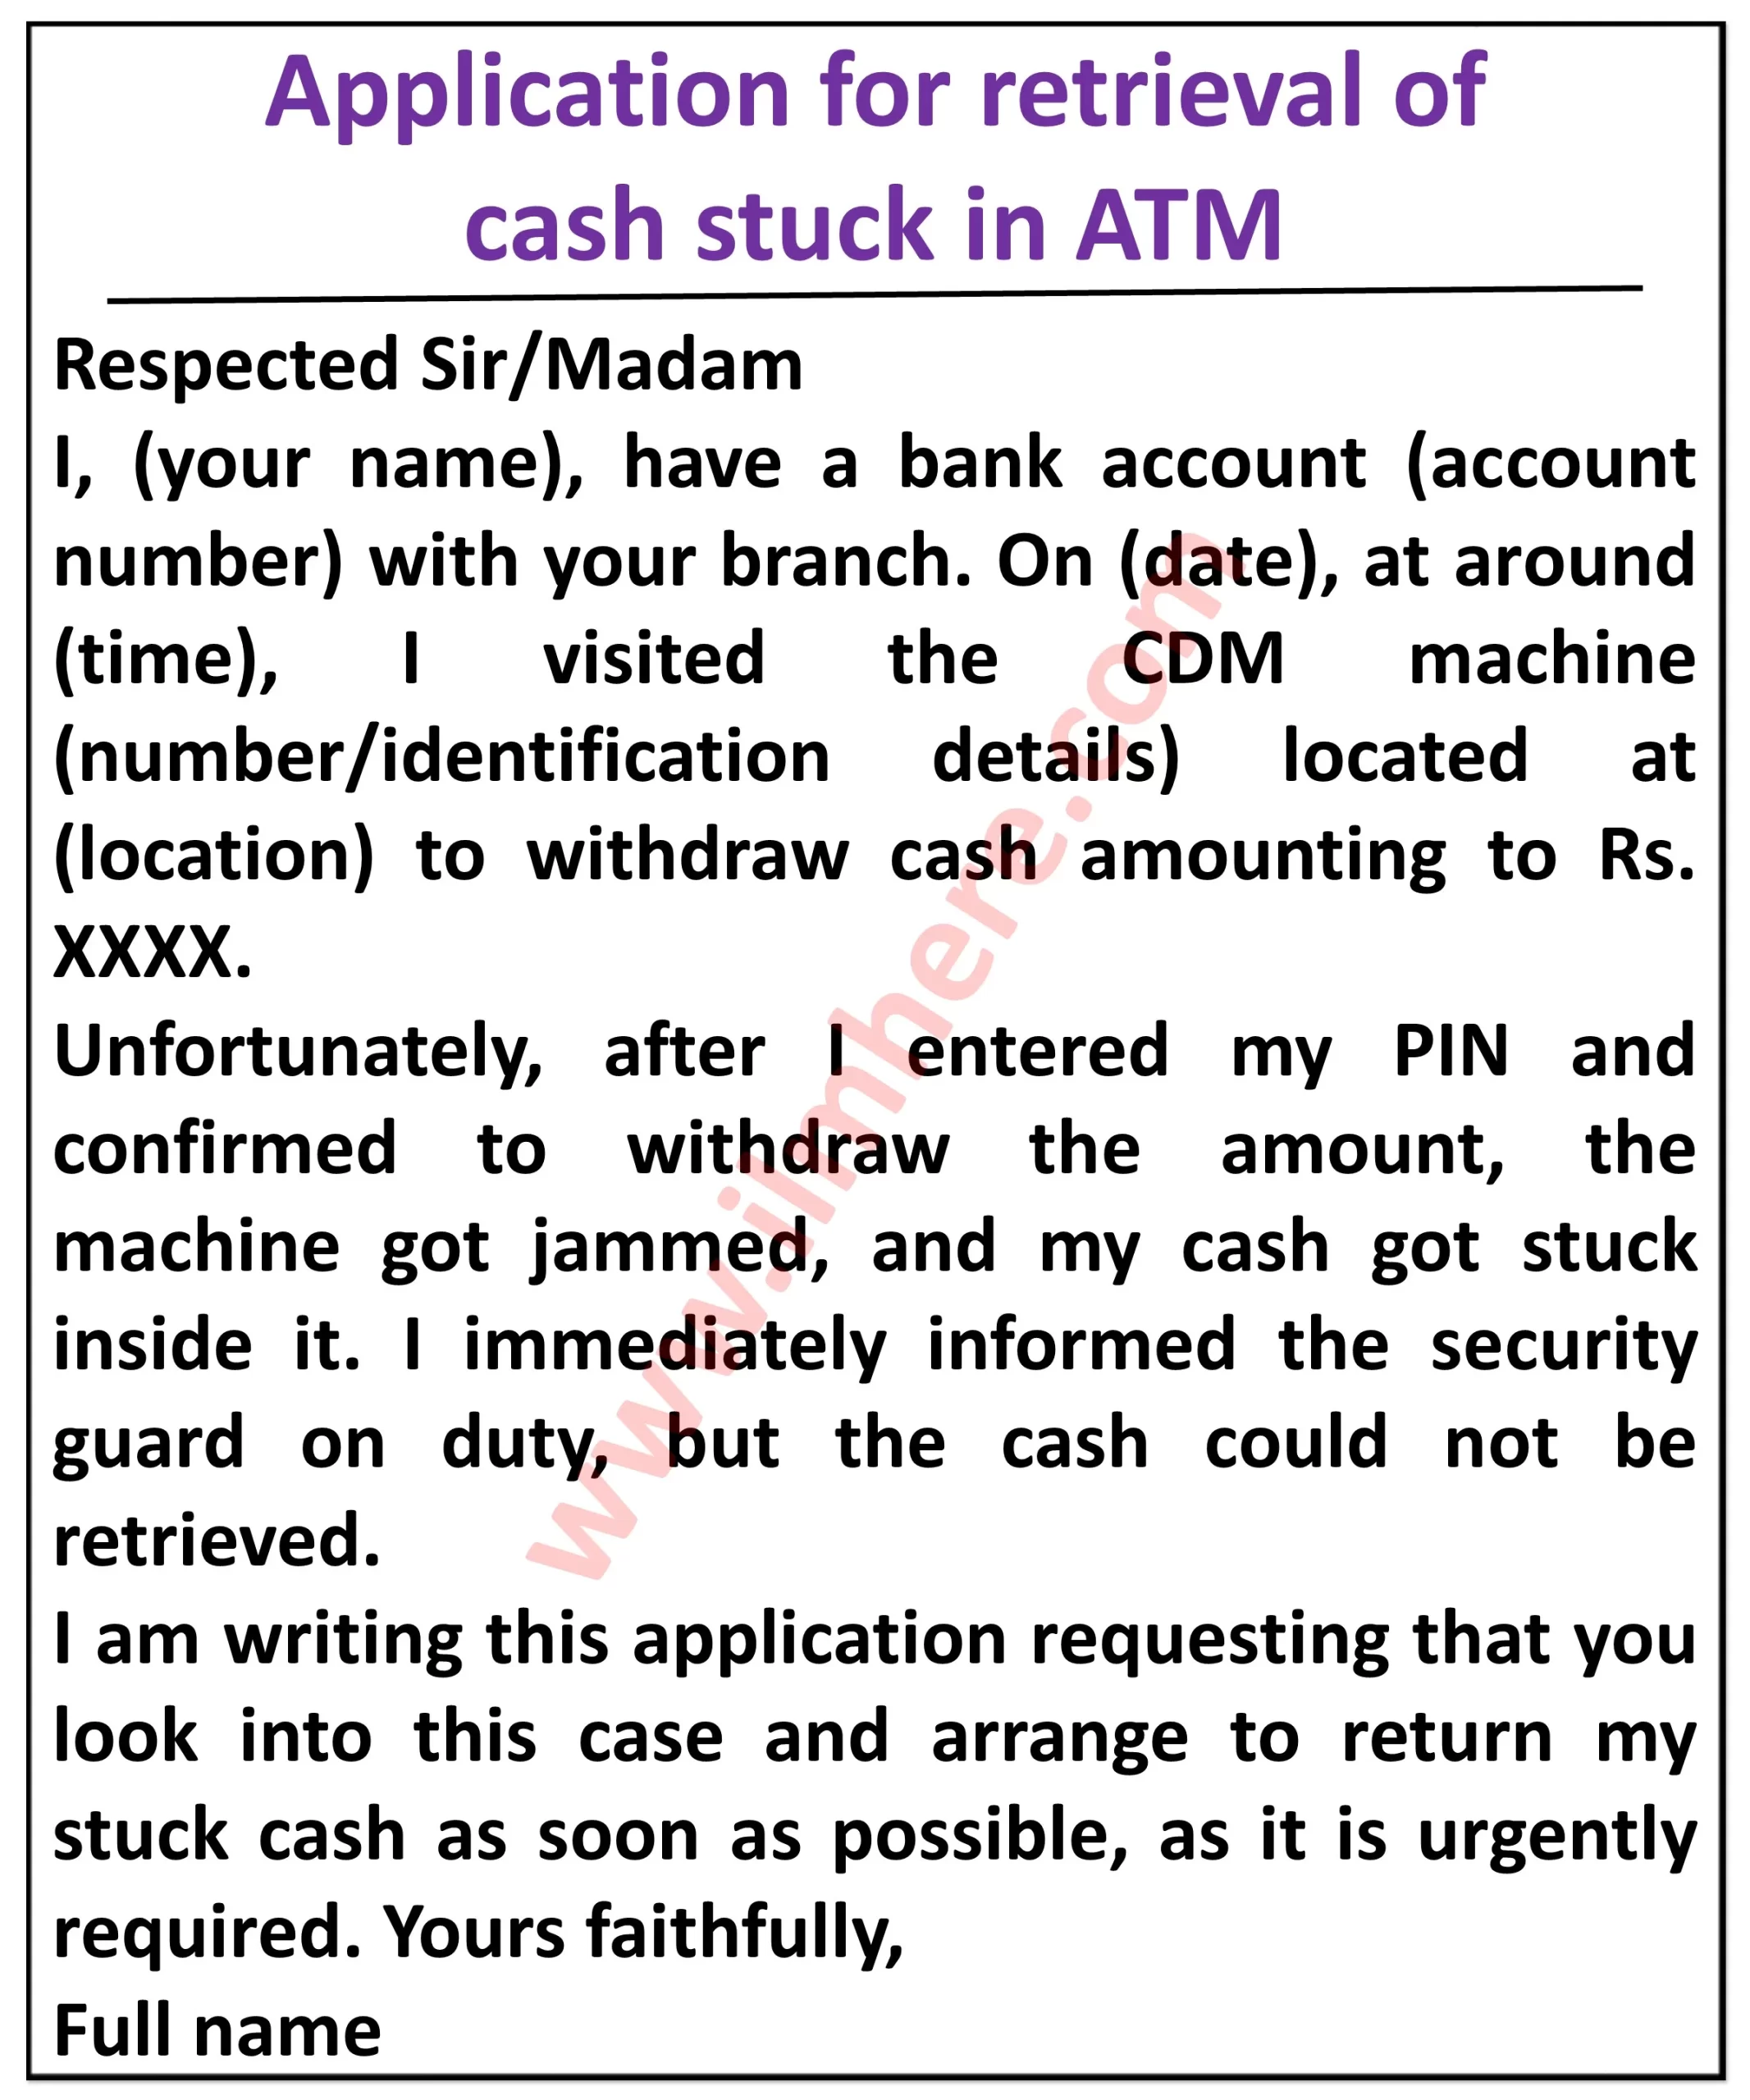 it appears to be of a different application compared to the previous ones. Based on the image it is related to the retrieval of cash stuck in an ATM and not from a CDM. Here's an explanation of the details I can extrac:Top Section: "Application for Retrieval of Cash Stuck in ATM" Body: "Respected Sir/Madam," followed by an introduction of the applicant with their account number: "I, [Your Name], have a bank account ([account number]) with your branch." A description of the incident: "On [date], at around [time], I visited the ATM machine (number/identification details) located at [location] to withdraw cash amounting to Rs. [amount]." Explanation of the issue: "Unfortunately, after I entered my PIN and confirmed to withdraw the amount, the machine got jammed, and my cash got stuck inside it. I immediately informed the security guard on duty, but the cash could not be retrieved." Request: "I am writing this application requesting that you look into this case and arrange to return my stuck cash as soon as possible, as it is urgently required." Closing: "Yours faithfully," followed by the applicant's full name and signature. Overall, the application serves as a formal request to the bank to investigate and retrieve cash stuck in an ATM due to a malfunction. It includes details of the applicant, the incident, and the urgency of the situation.